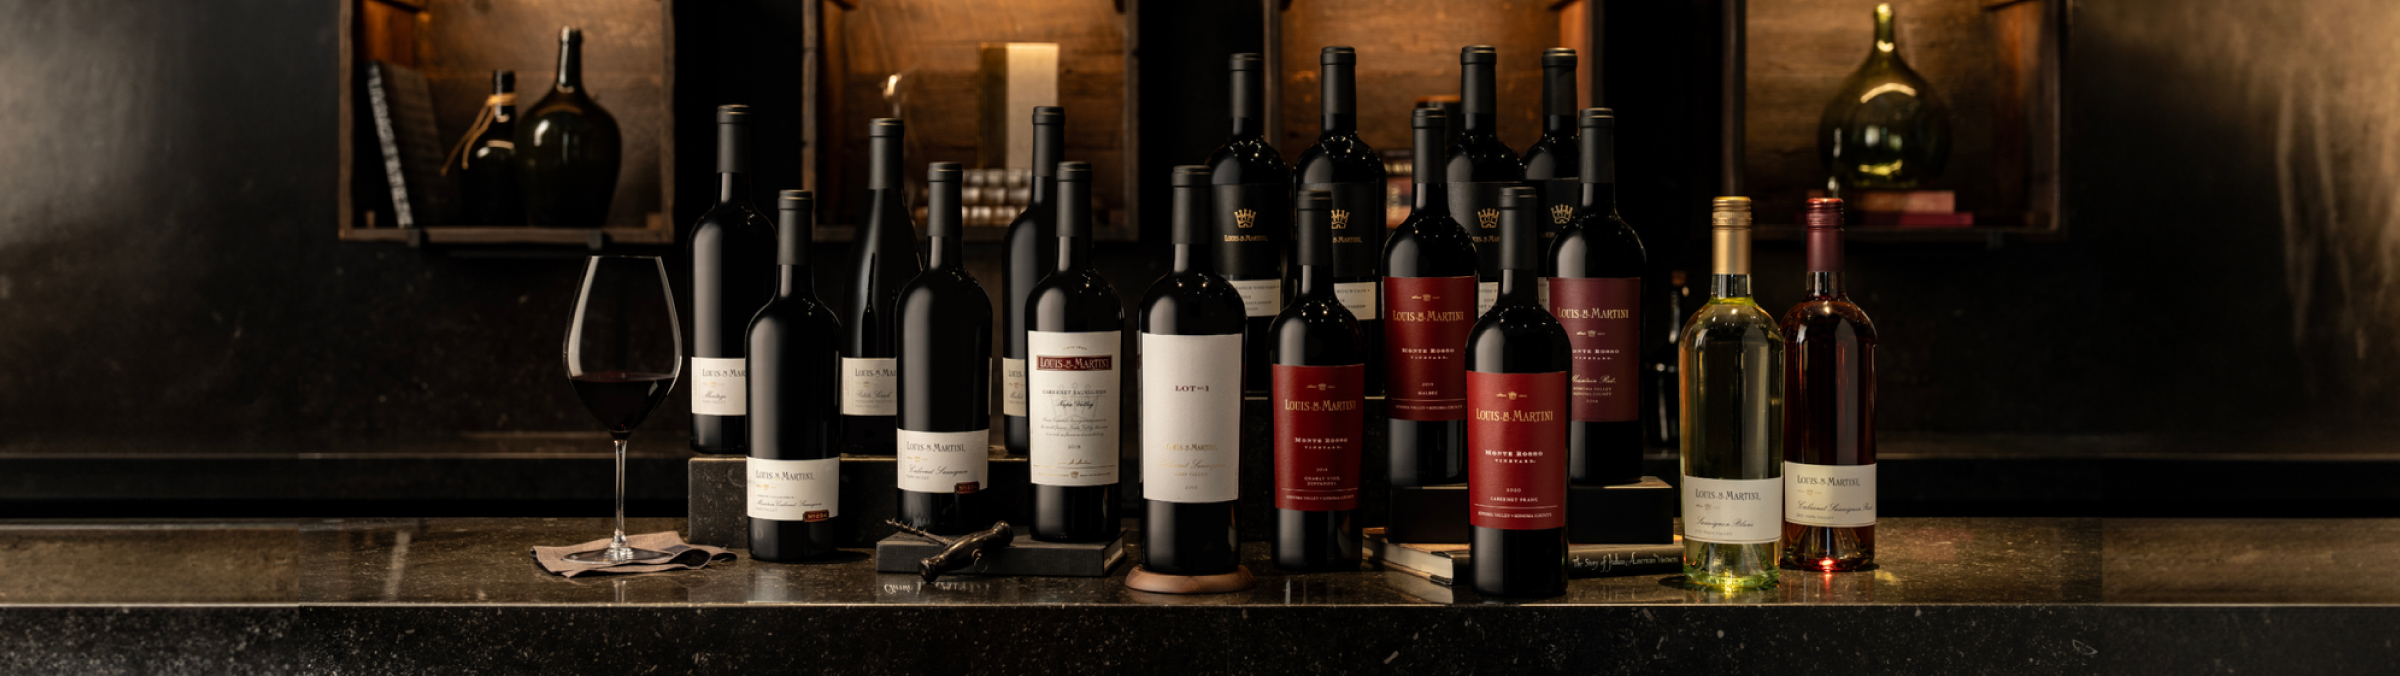 A collection of Louis M. Martini wines.